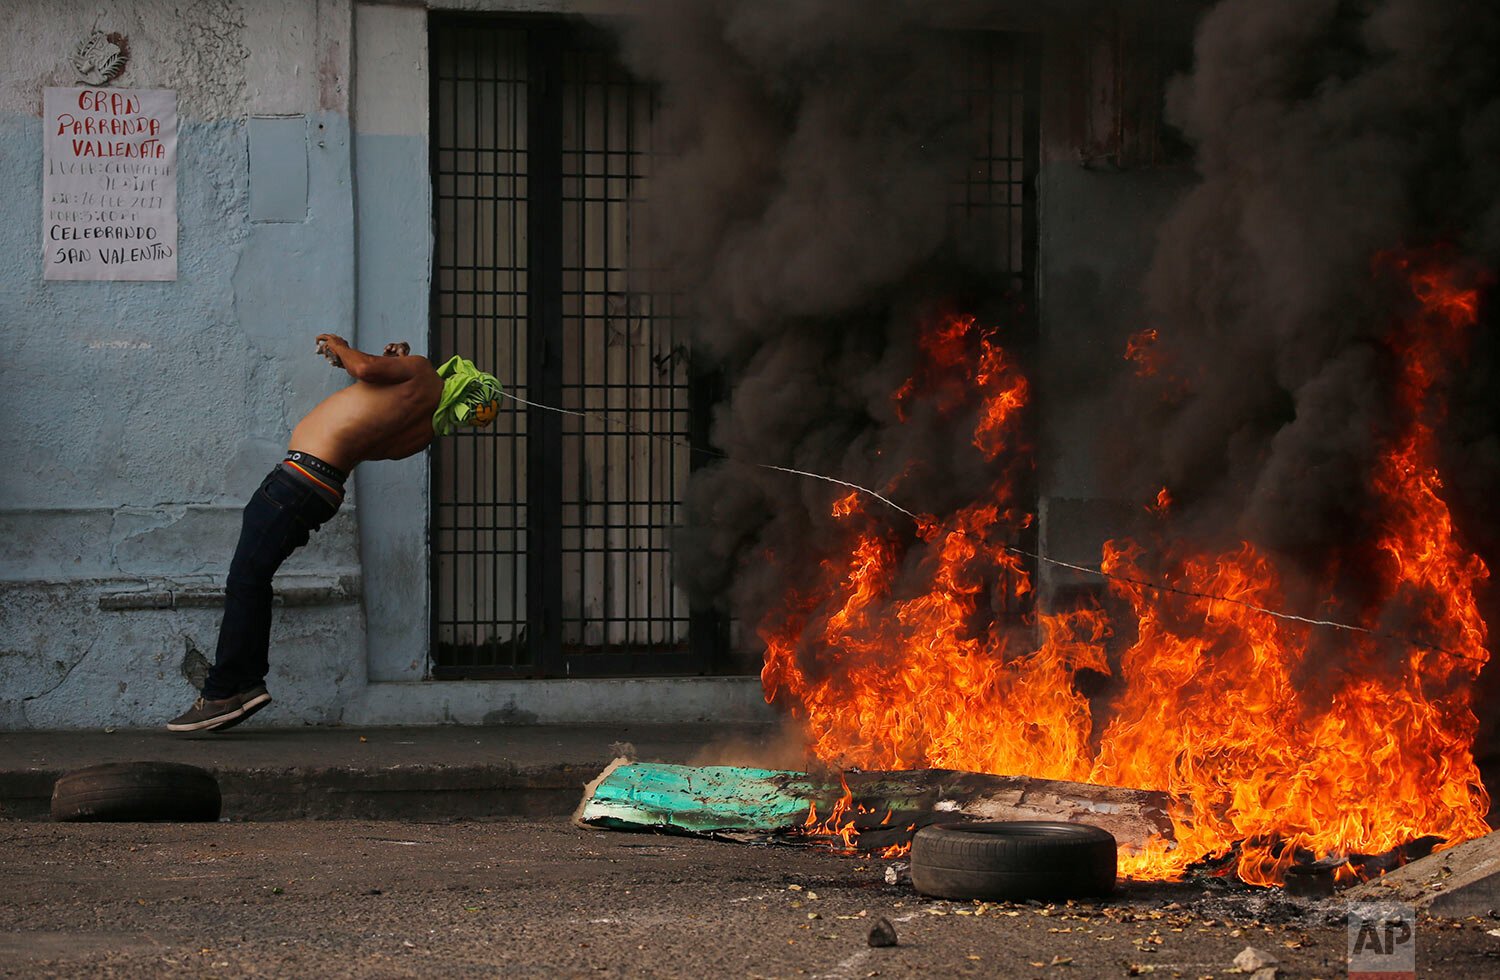 A demonstrator is knocked over by a strand of barbed wire during clashes with the Bolivarian National Guard in Urena, Venezuela, near the border with Colombia 